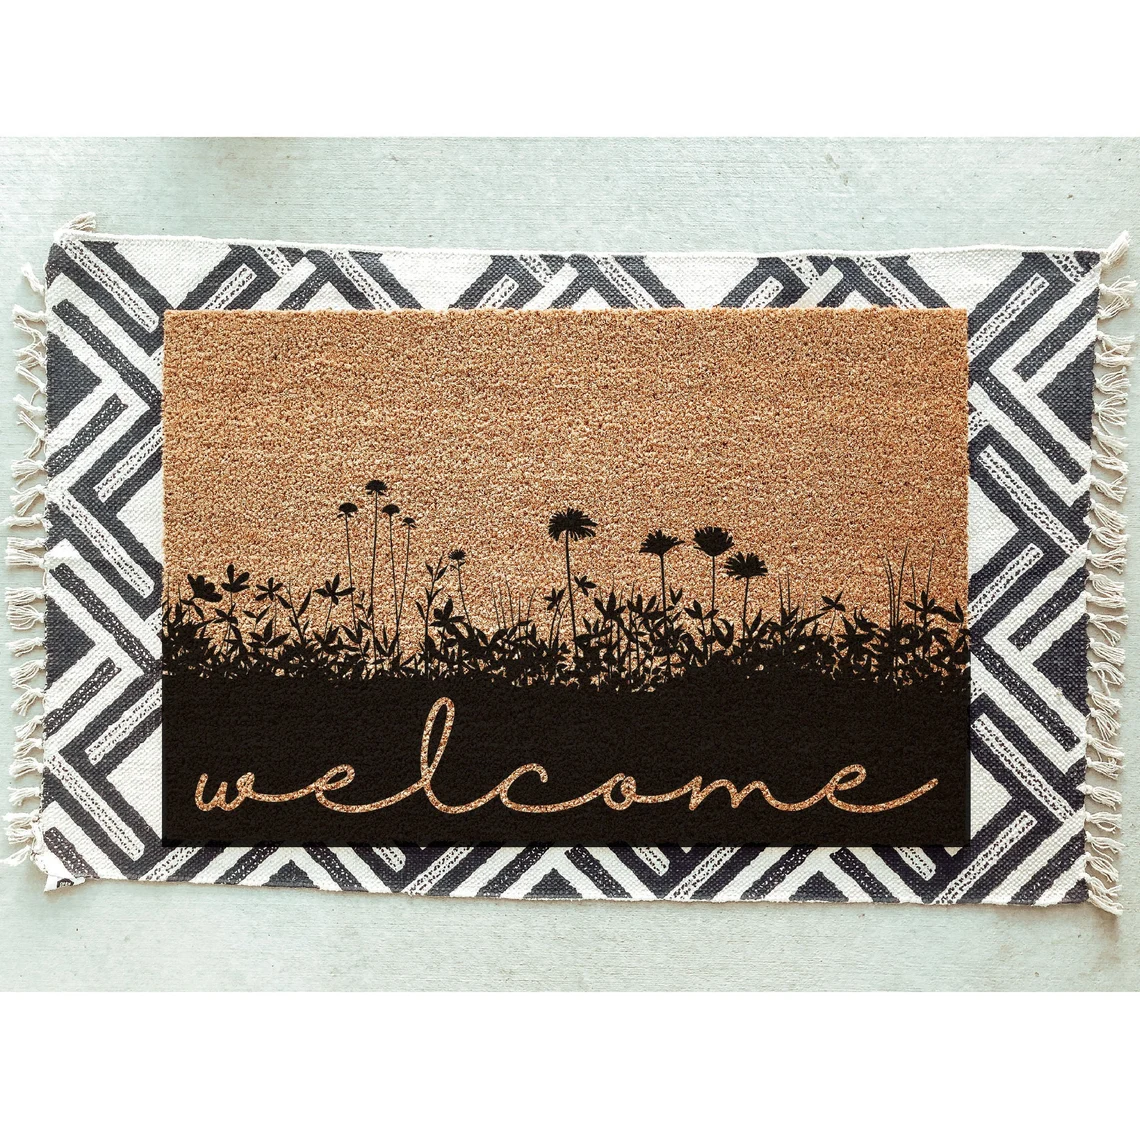 Summer Doormat Combinations You Will Love - The Sommer Home